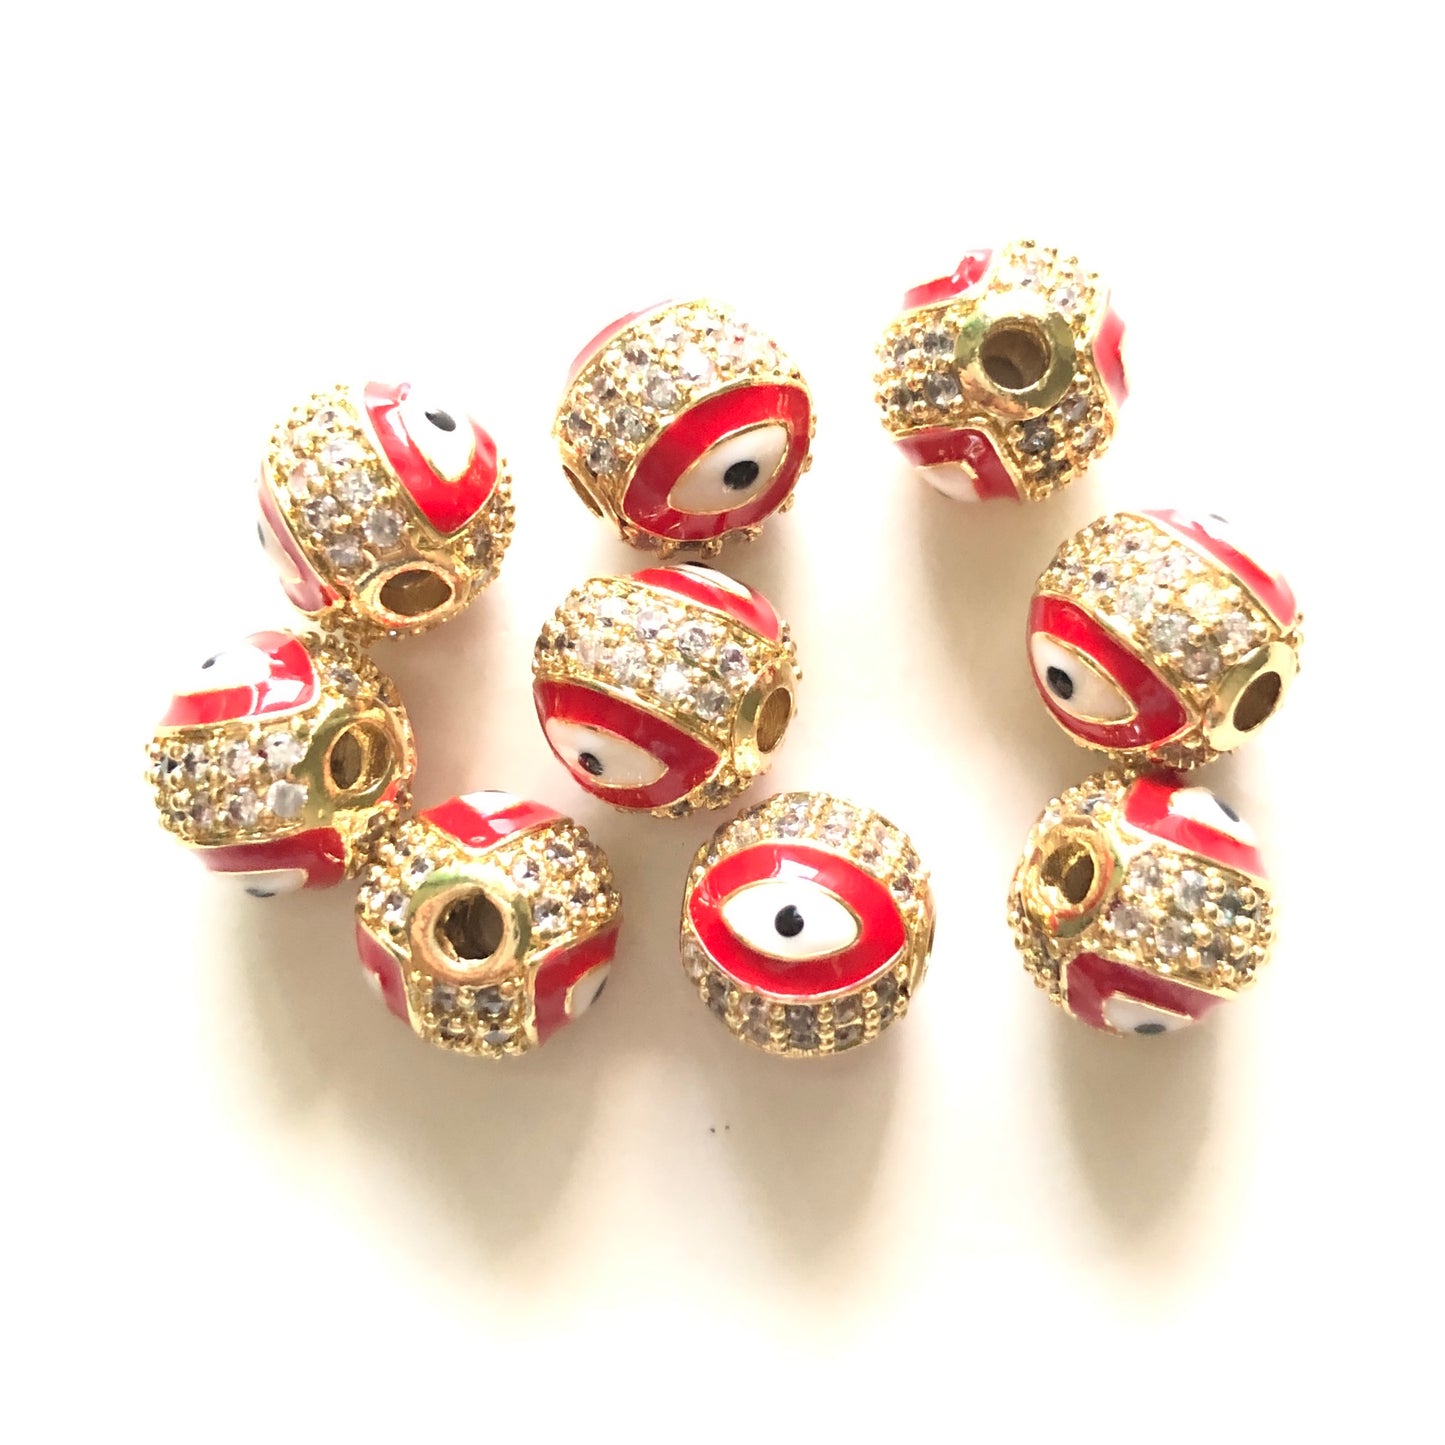 10pcs/lot 10mm CZ Paved Gold Evil Eye Ball Spacers Beads Red CZ Paved Spacers 10mm Beads Ball Beads New Spacers Arrivals Charms Beads Beyond